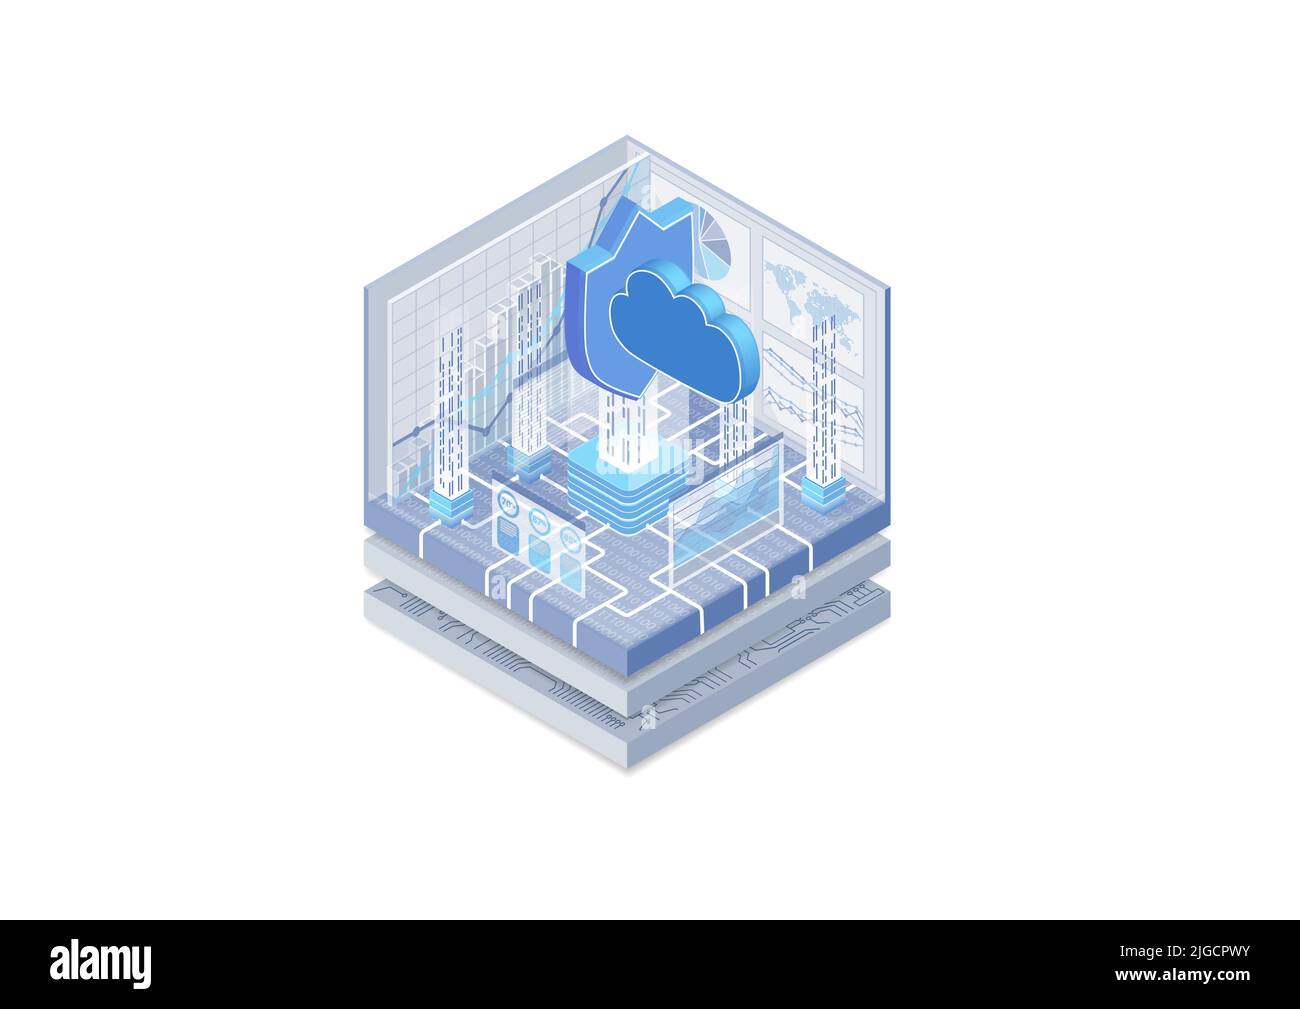 Cloud computing security concept. Vector illustration of an isometric cube. Symbol of a cloud and shield to represent protection of internet data flow Stock Vector